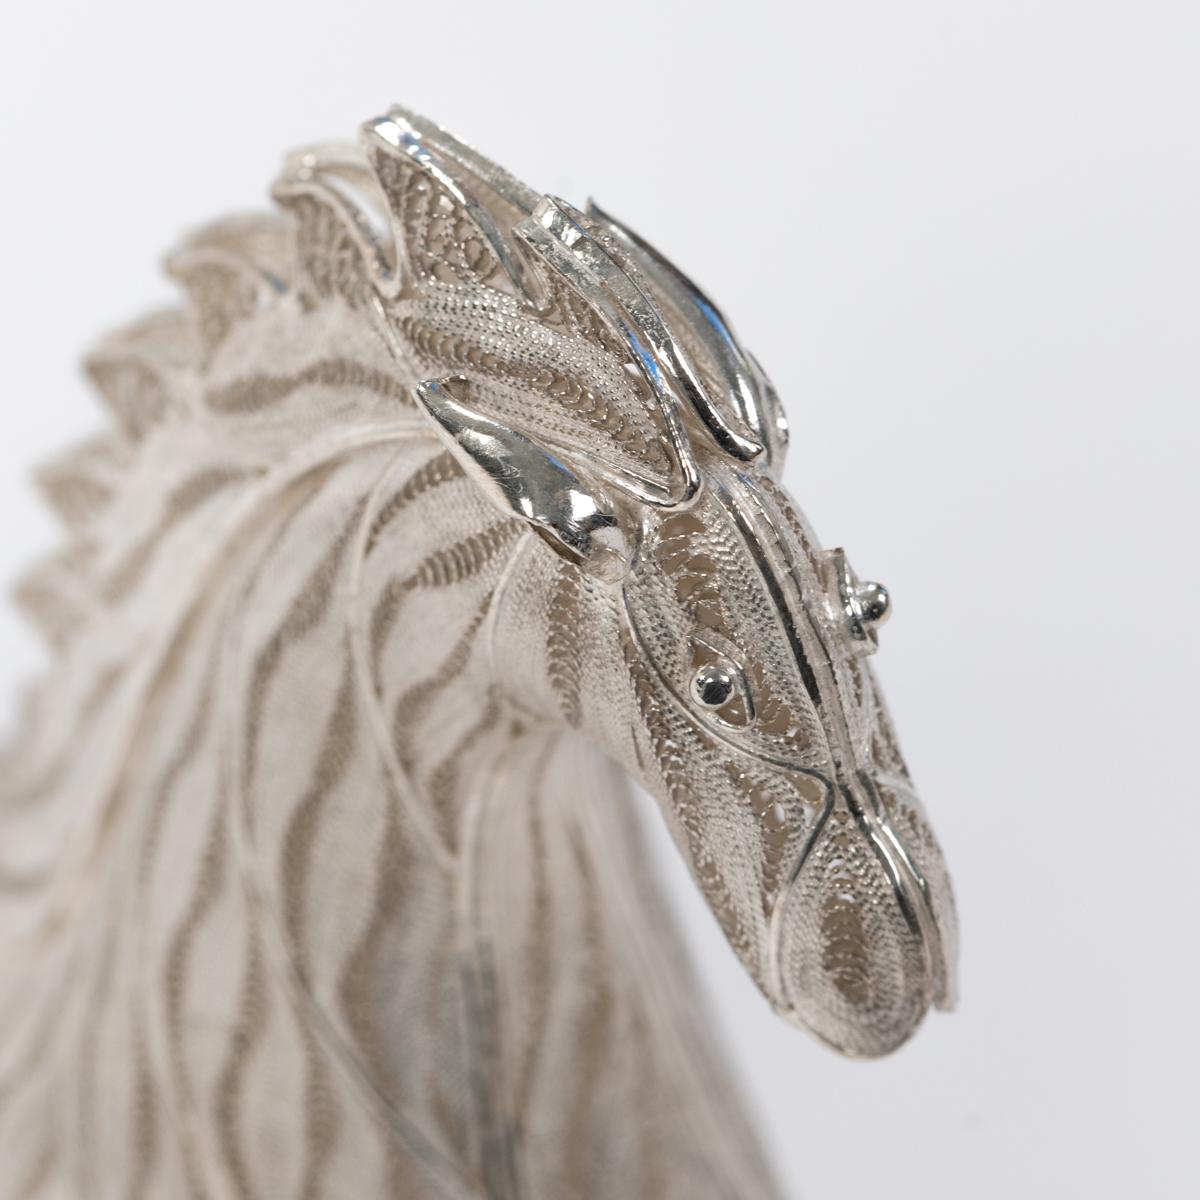 Jumping Horse Sculpture 925 Silver Handcrafted Filigree Technique Germany 2005 For Sale 5